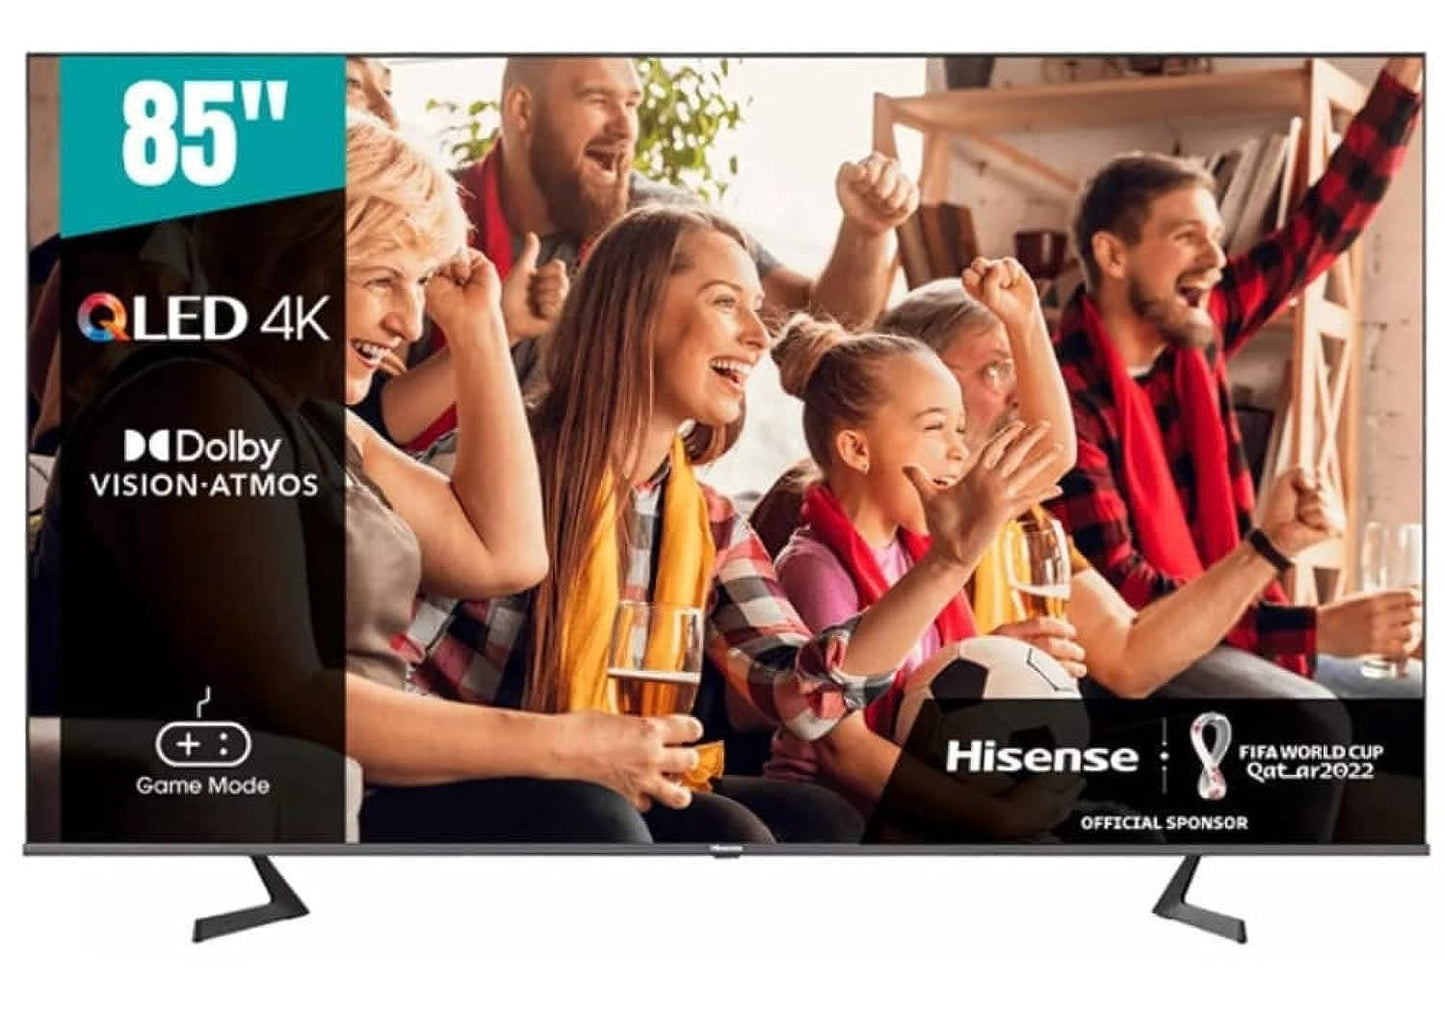 Hisense 85 inch TV A7HQ QLED 4K Smart TV With Quantum Dot, Dolby Vision & Atoms Color Black Model - 85A7HQ - 1 Year Warranty.